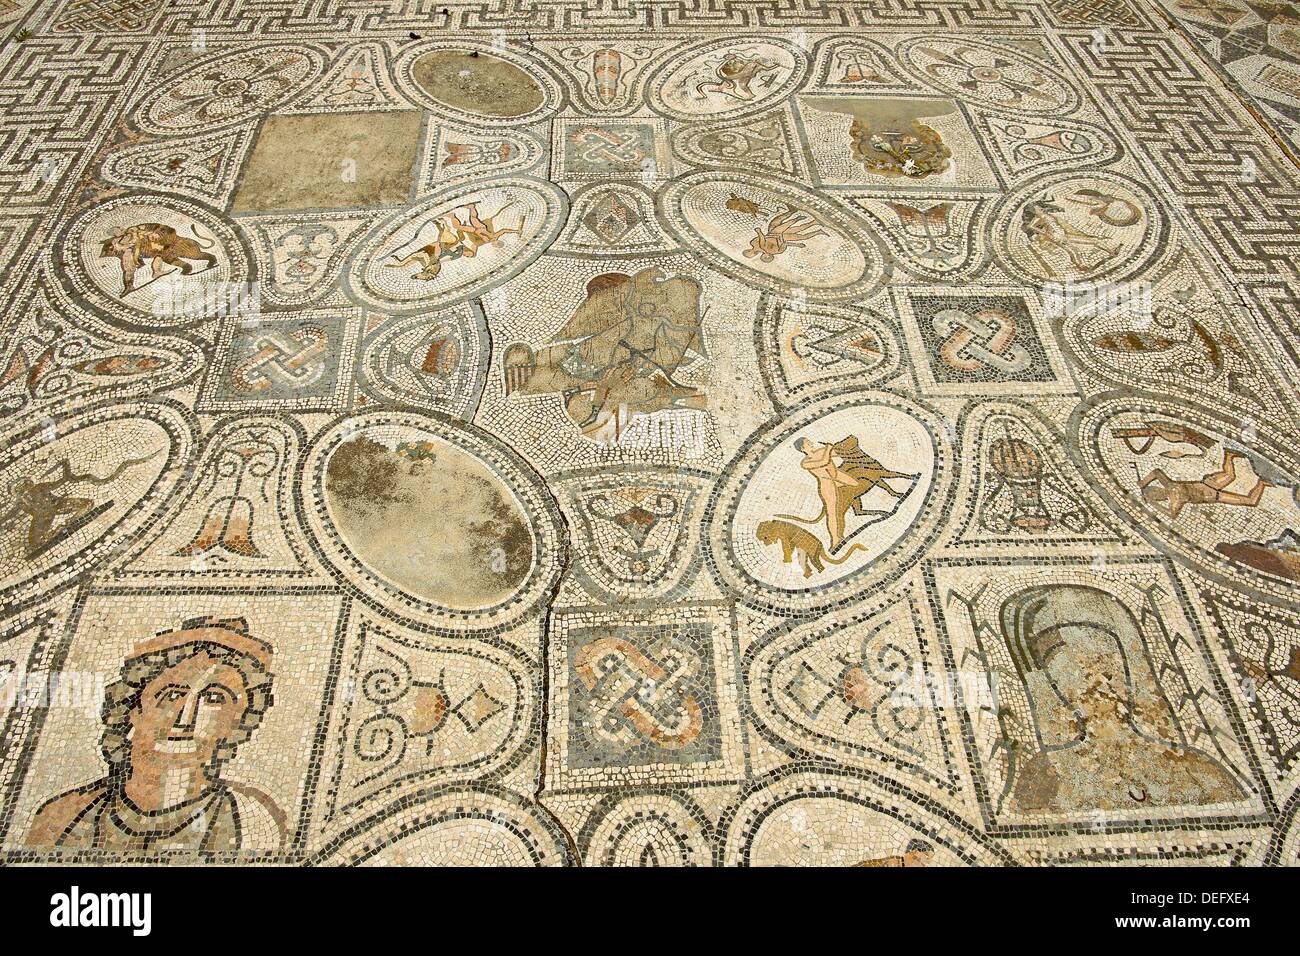 Mosaics of the house of the labors of Hercules, Roman city of Volubilis, II bc, Morocco archeological site Stock Photo